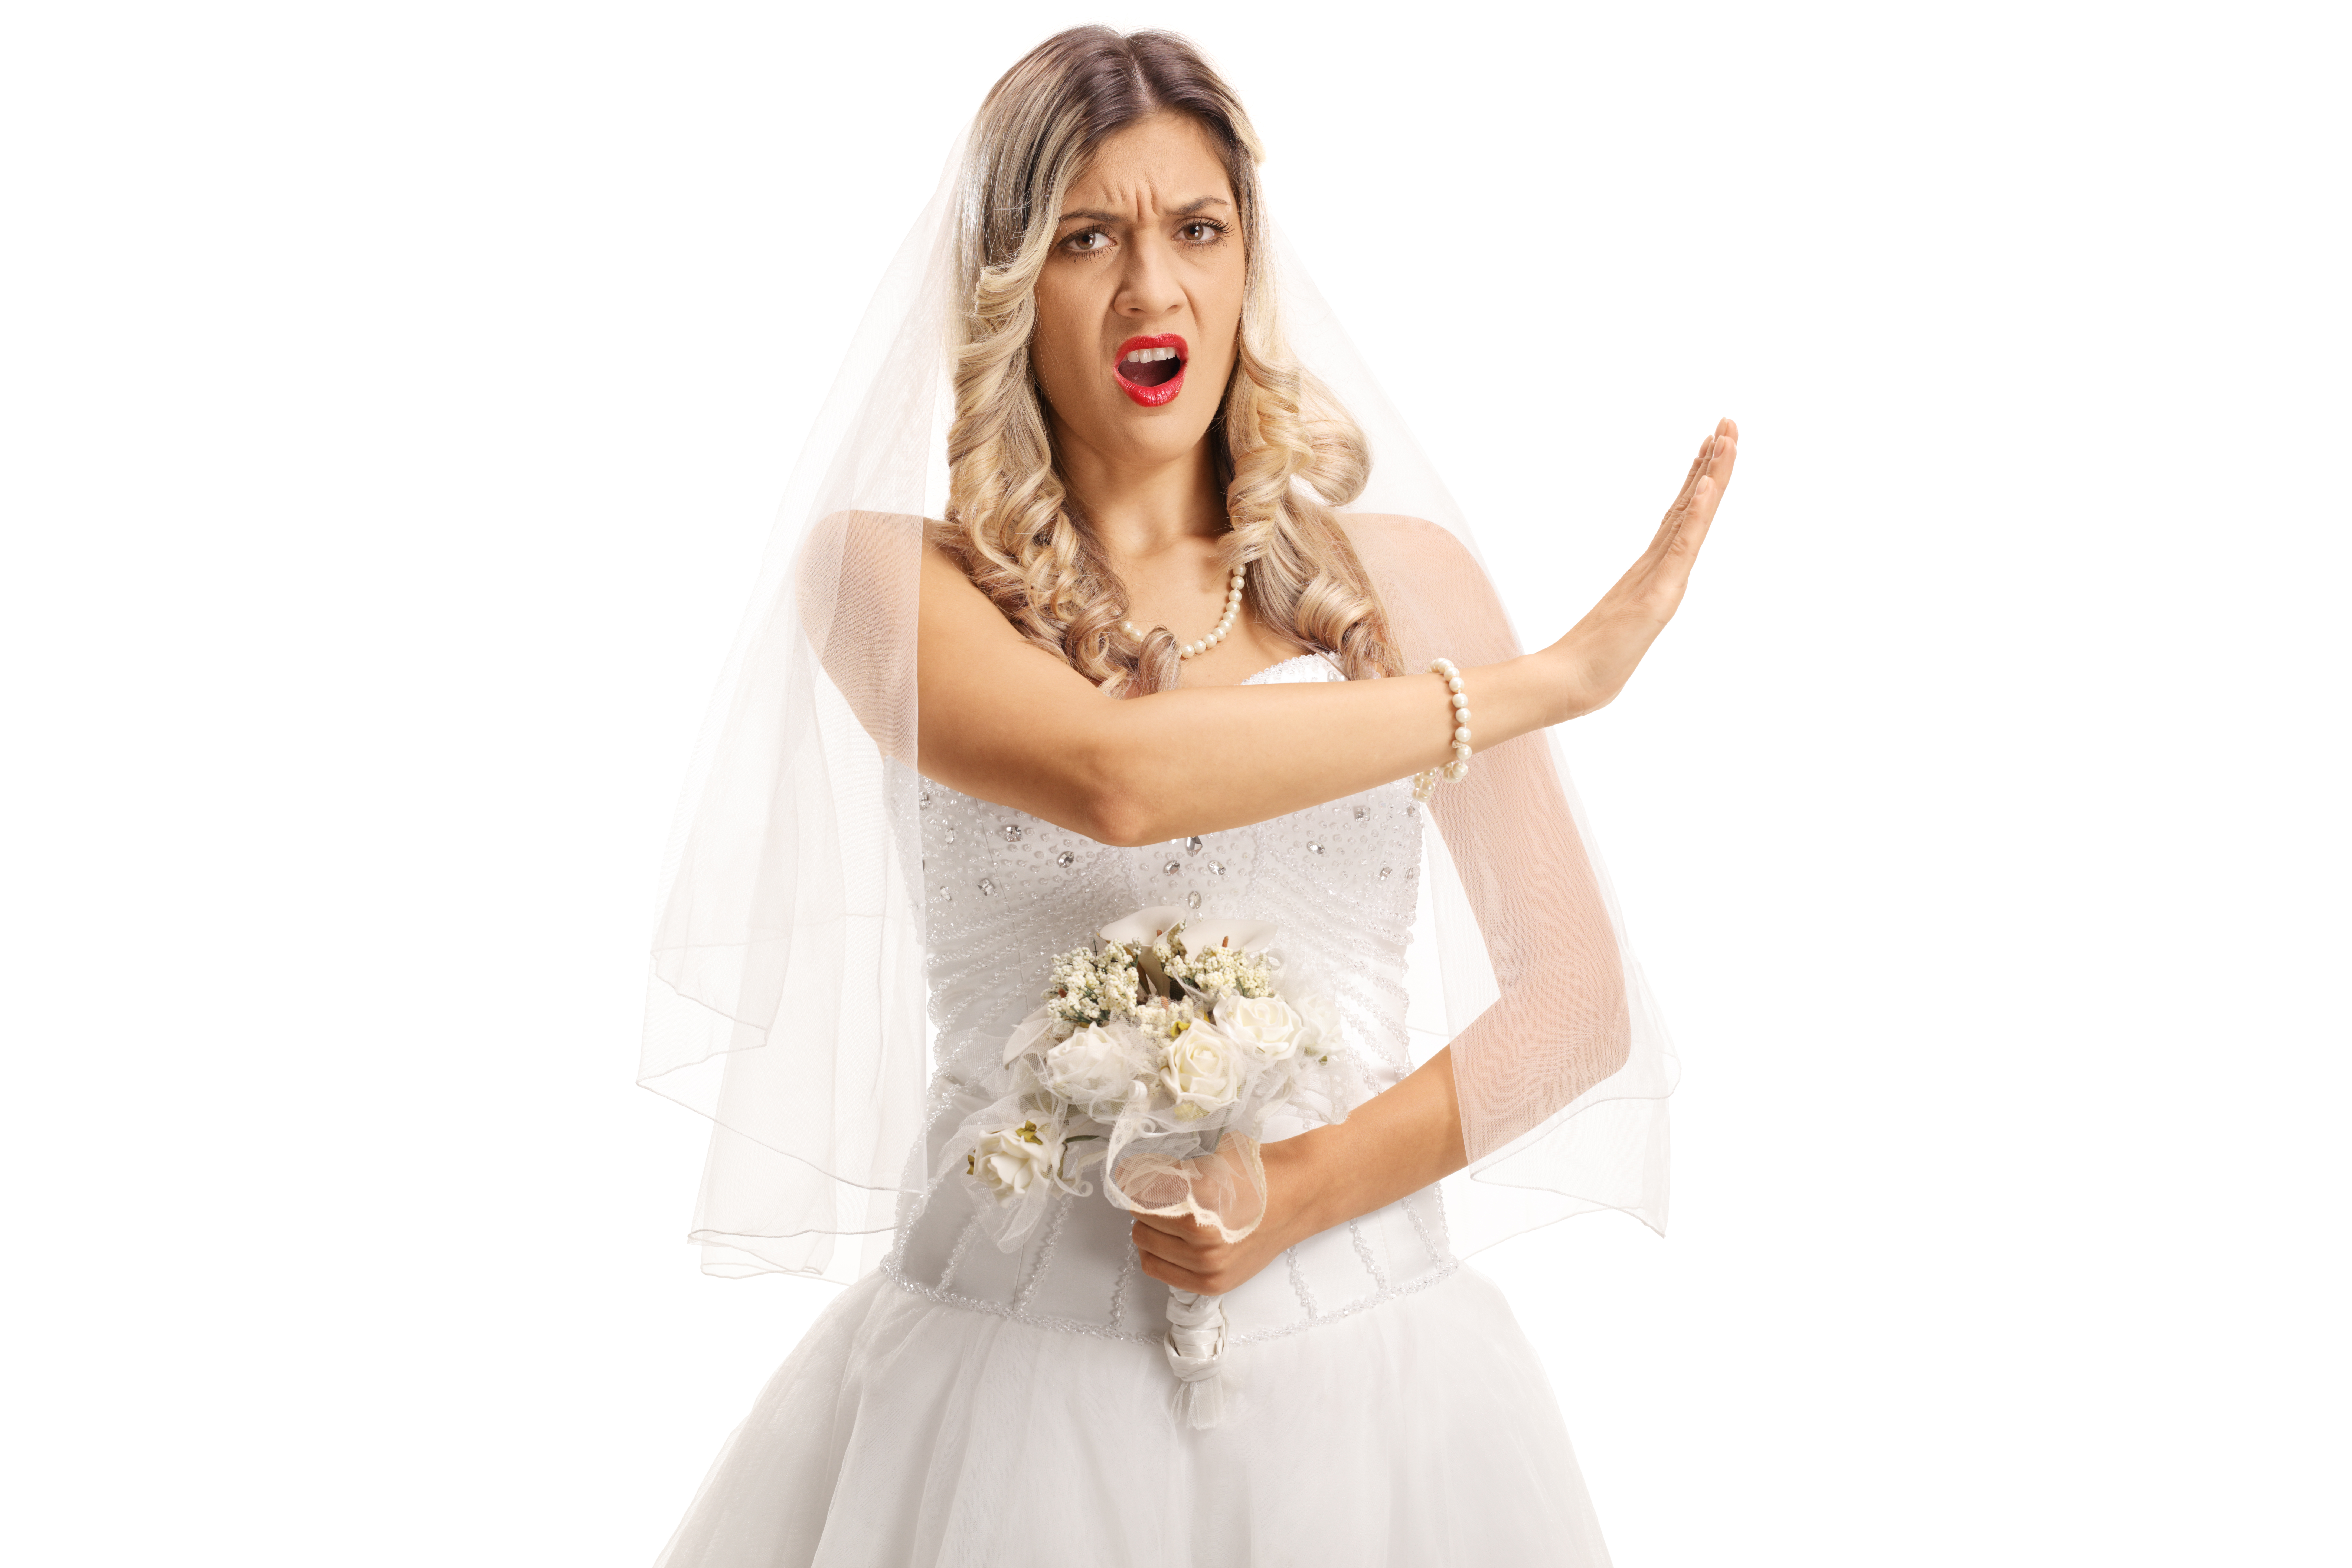 An angry bride gesturing "stop" with her hand | Source: Shutterstock